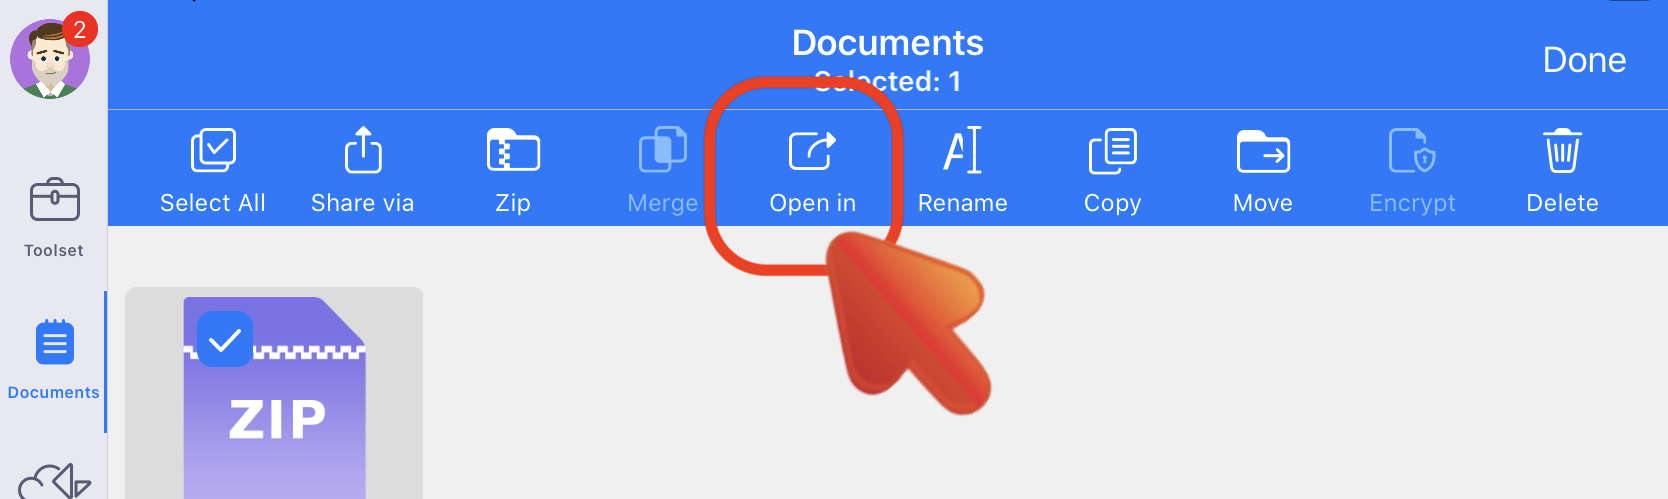 PDF_iPad_Documents_Edit_Open_in.PNG